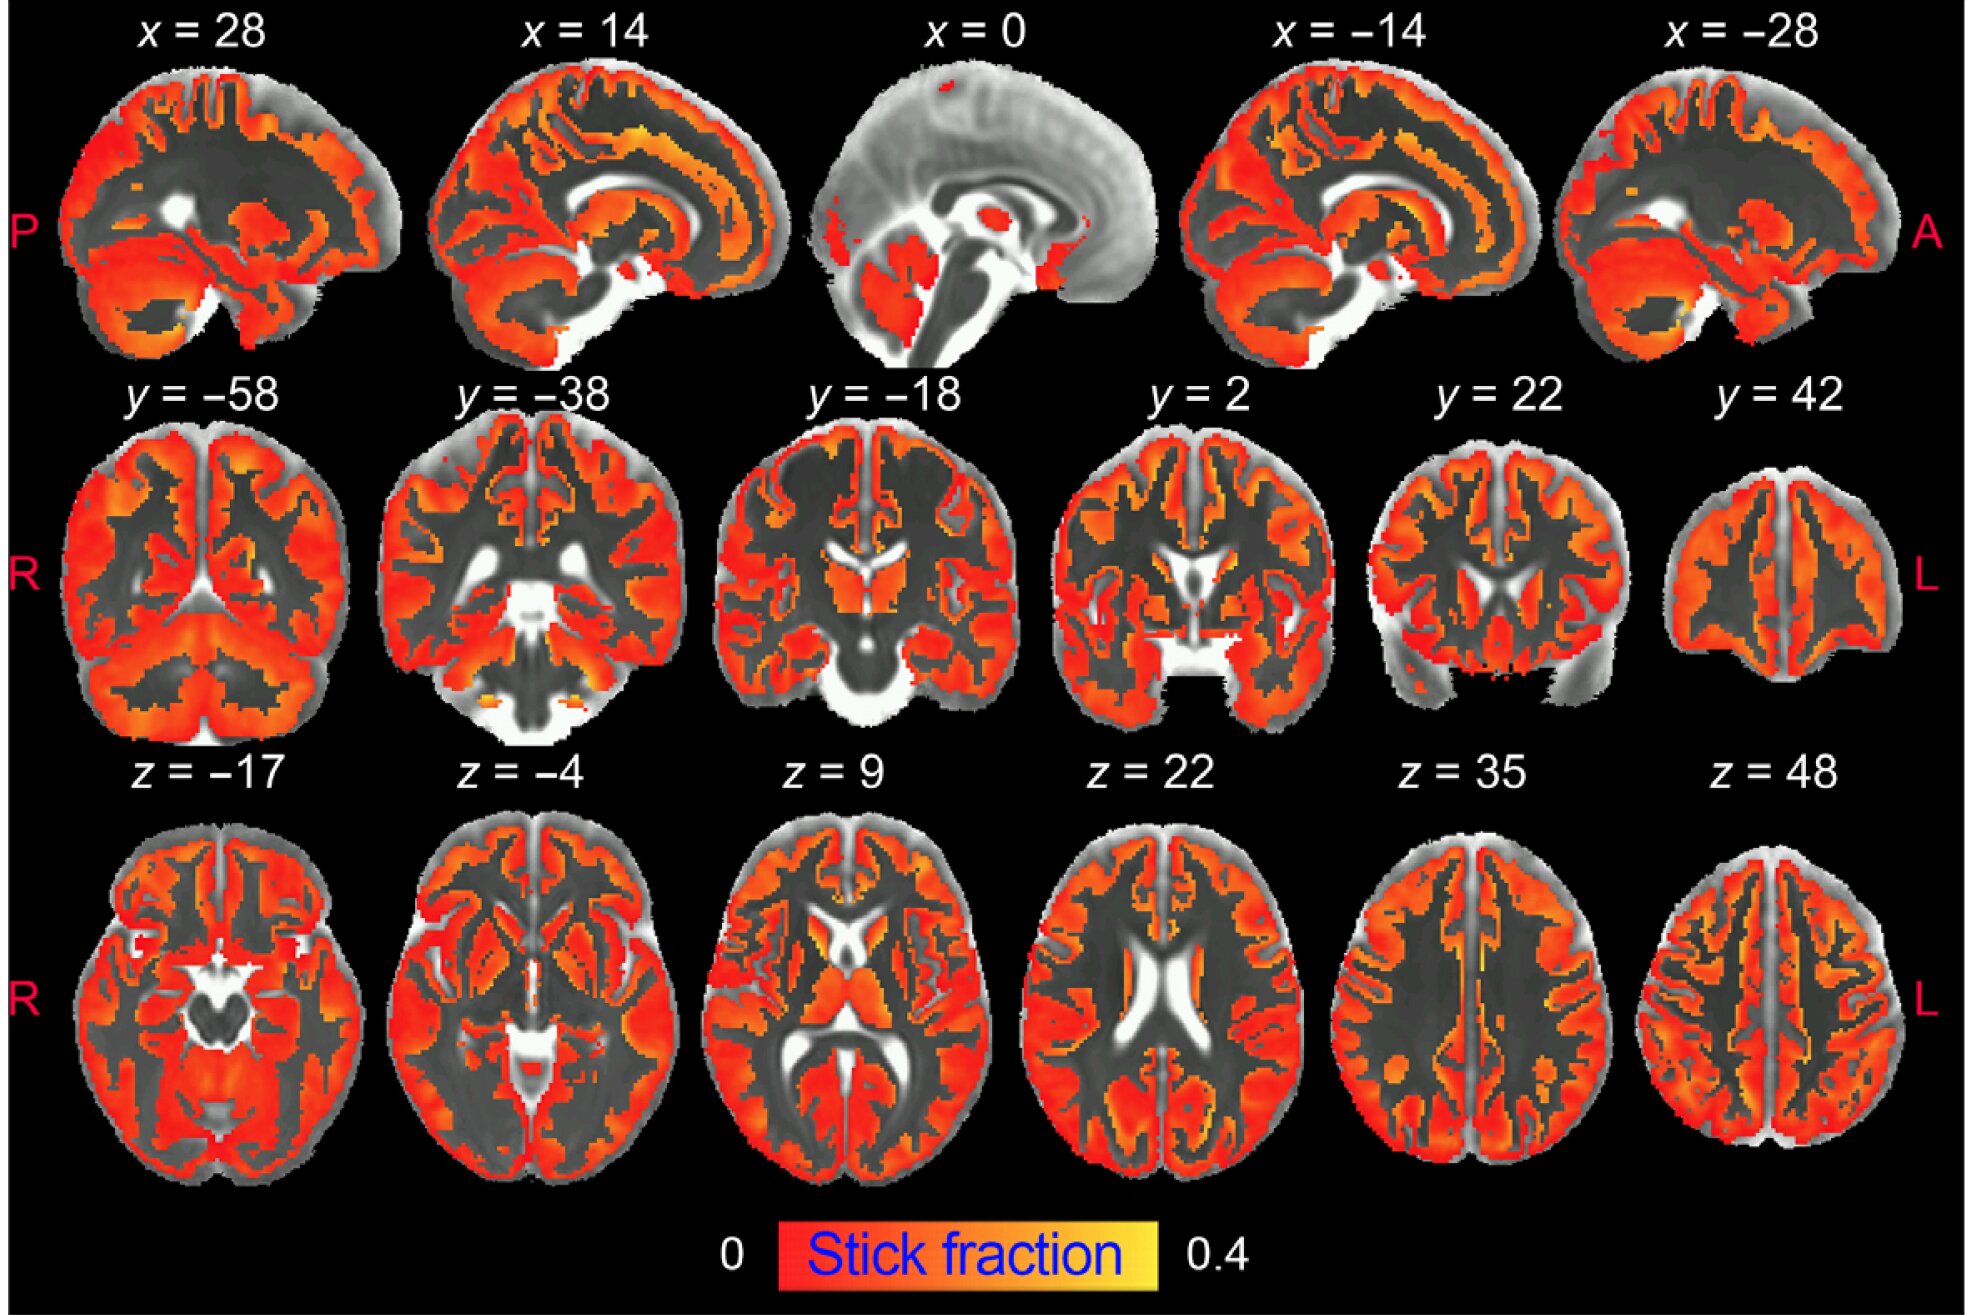 #Magnetic resonance imaging shows brain inflammation in vivo for the first time